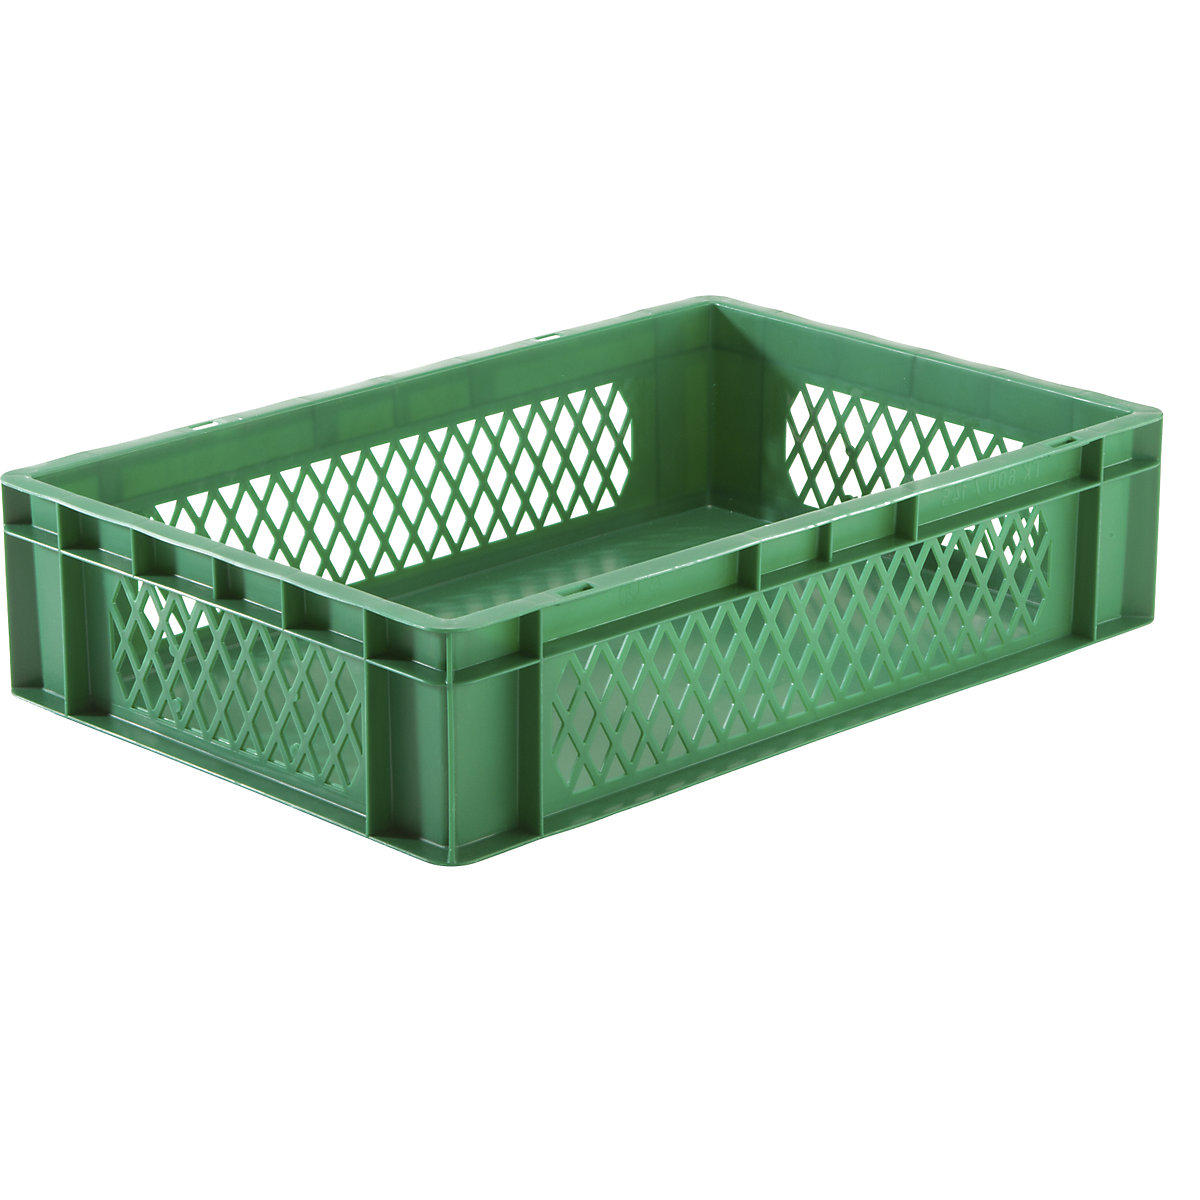 Euro stacking container, perforated walls, closed base, LxWxH 600 x 400 x 145 mm, green, pack of 5-8